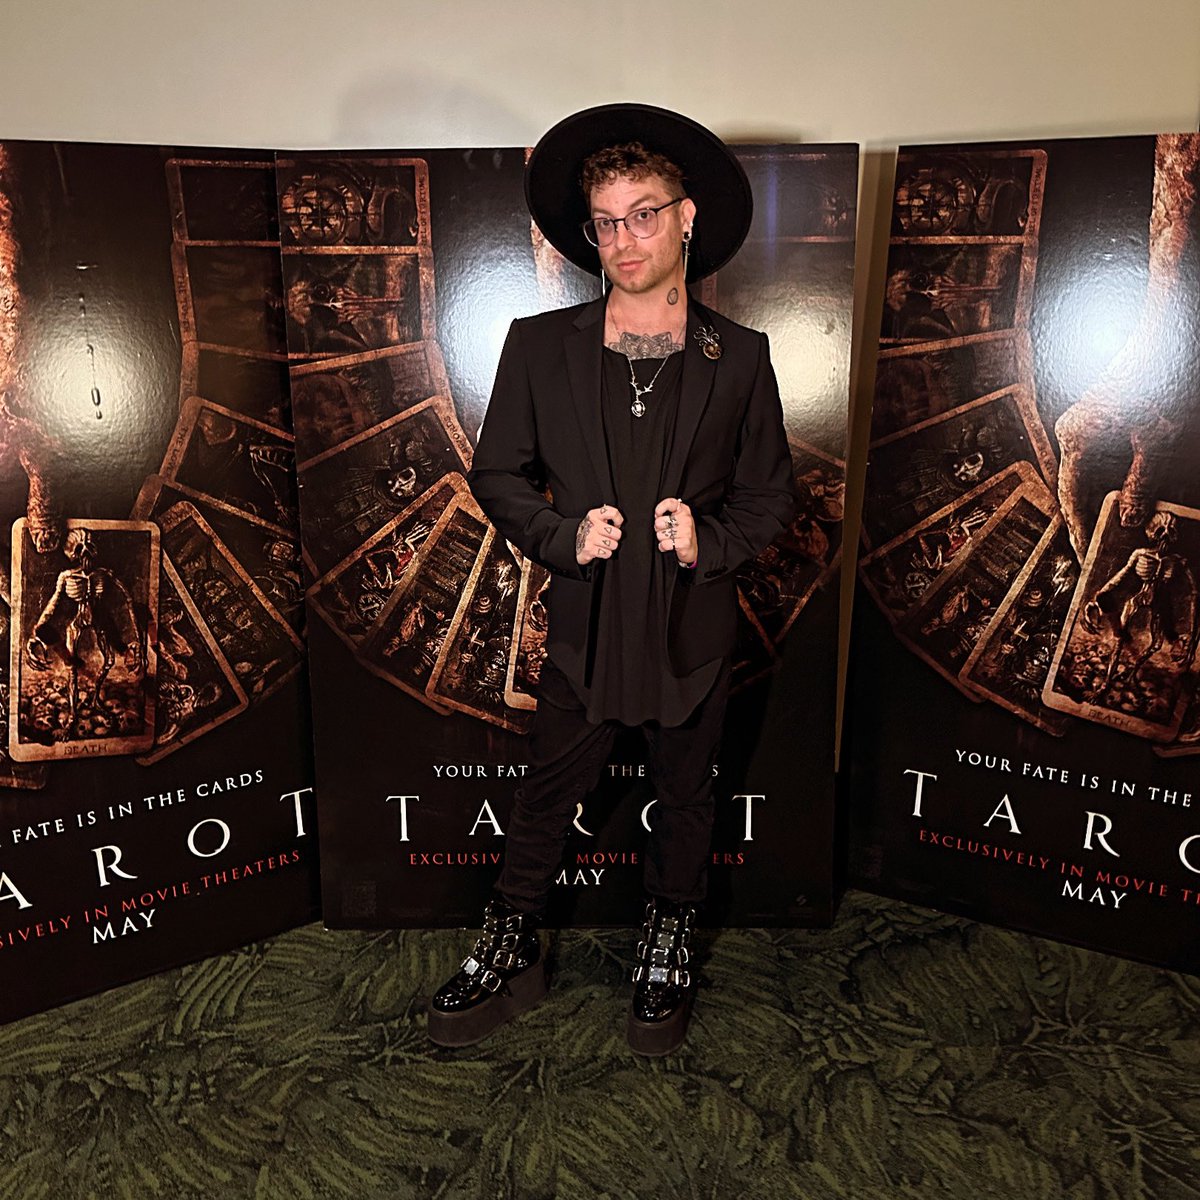 I had so much fun reading at the advanced screening of @TarotMovie 🫀🃏🖤 thanks @SonyPictures for having me 💯 #madamadam #tarot #TarotReading #TarotMovie